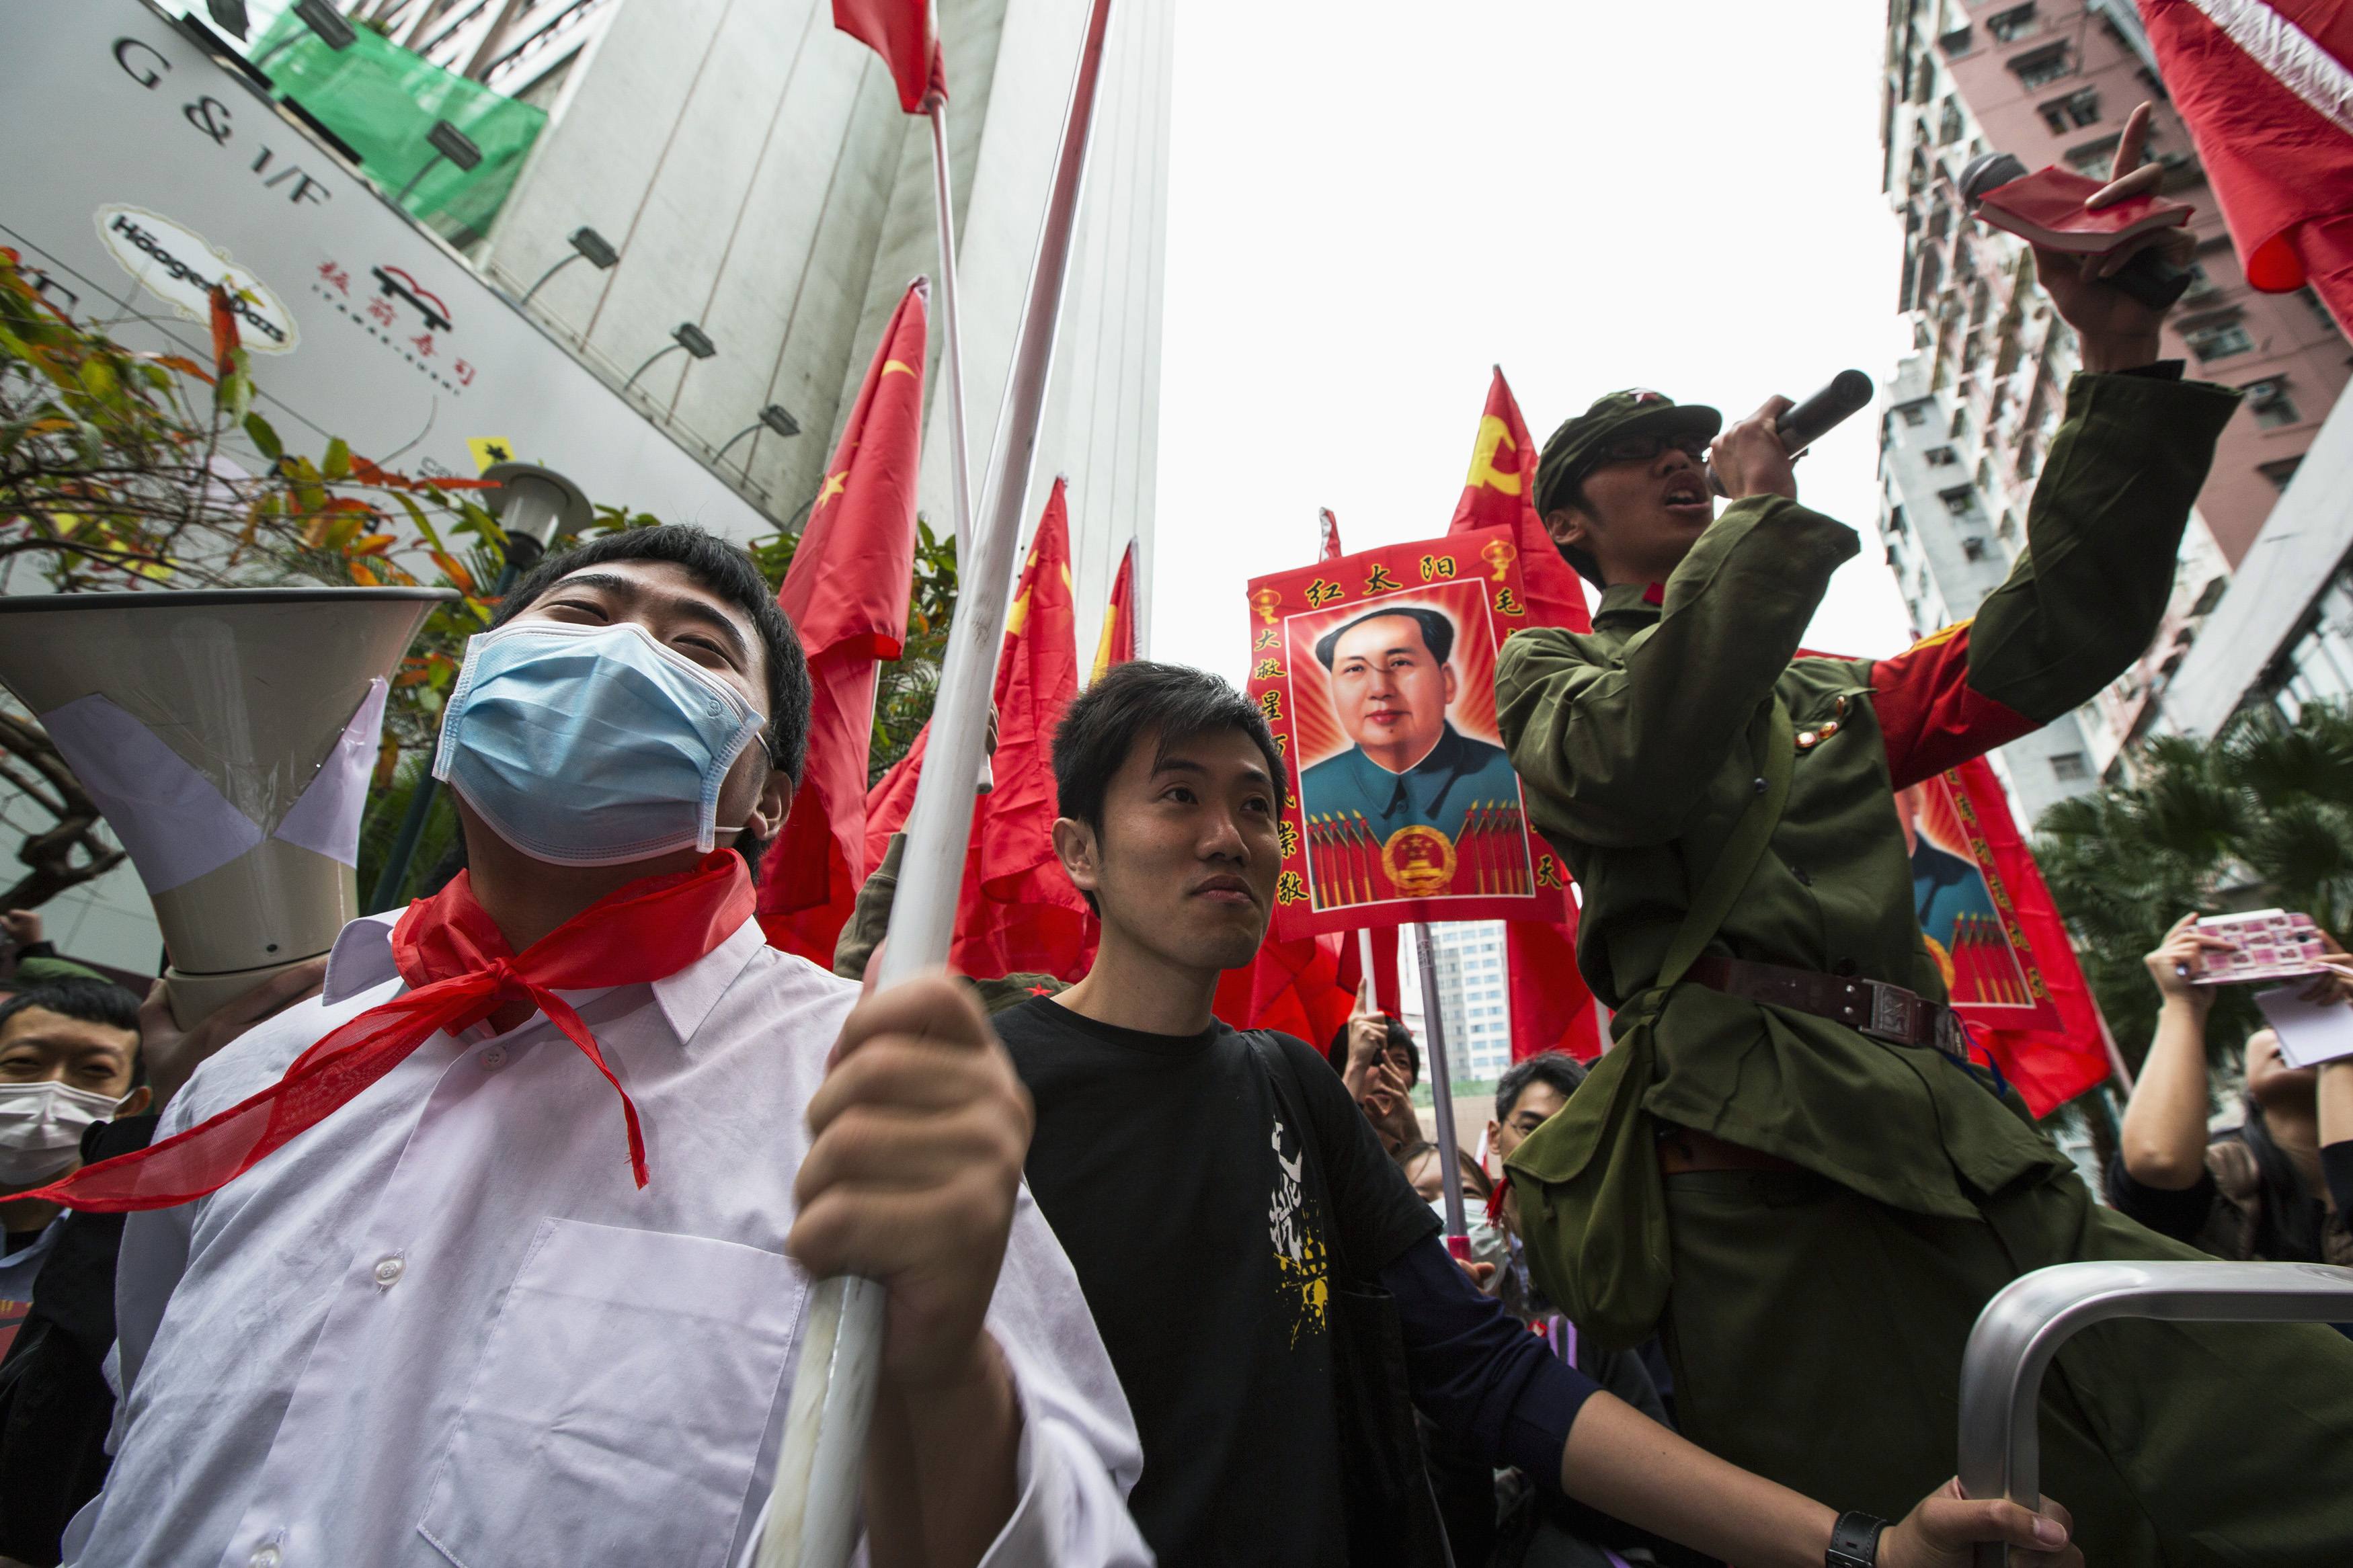 Protesters hold Chinese national flags and a picture of late Chinese Communist Party leader Mao Zedong during an anti-mainland tourist rally in Hong Kong's famous Mong Kok shopping district March 9, 2014. Hundreds of protesters joined a rally organized by an anti-mainland group in Mong Kok, mocking and dissuading mainland Chinese shoppers from buying imported daily essentials in Hong Kong. The protesters claim that prices of imported daily essentials have gone up and supply is limited, according to local media. REUTERS/Tyrone Siu (CHINA - Tags: POLITICS BUSINESS CIVIL UNREST TRAVEL)